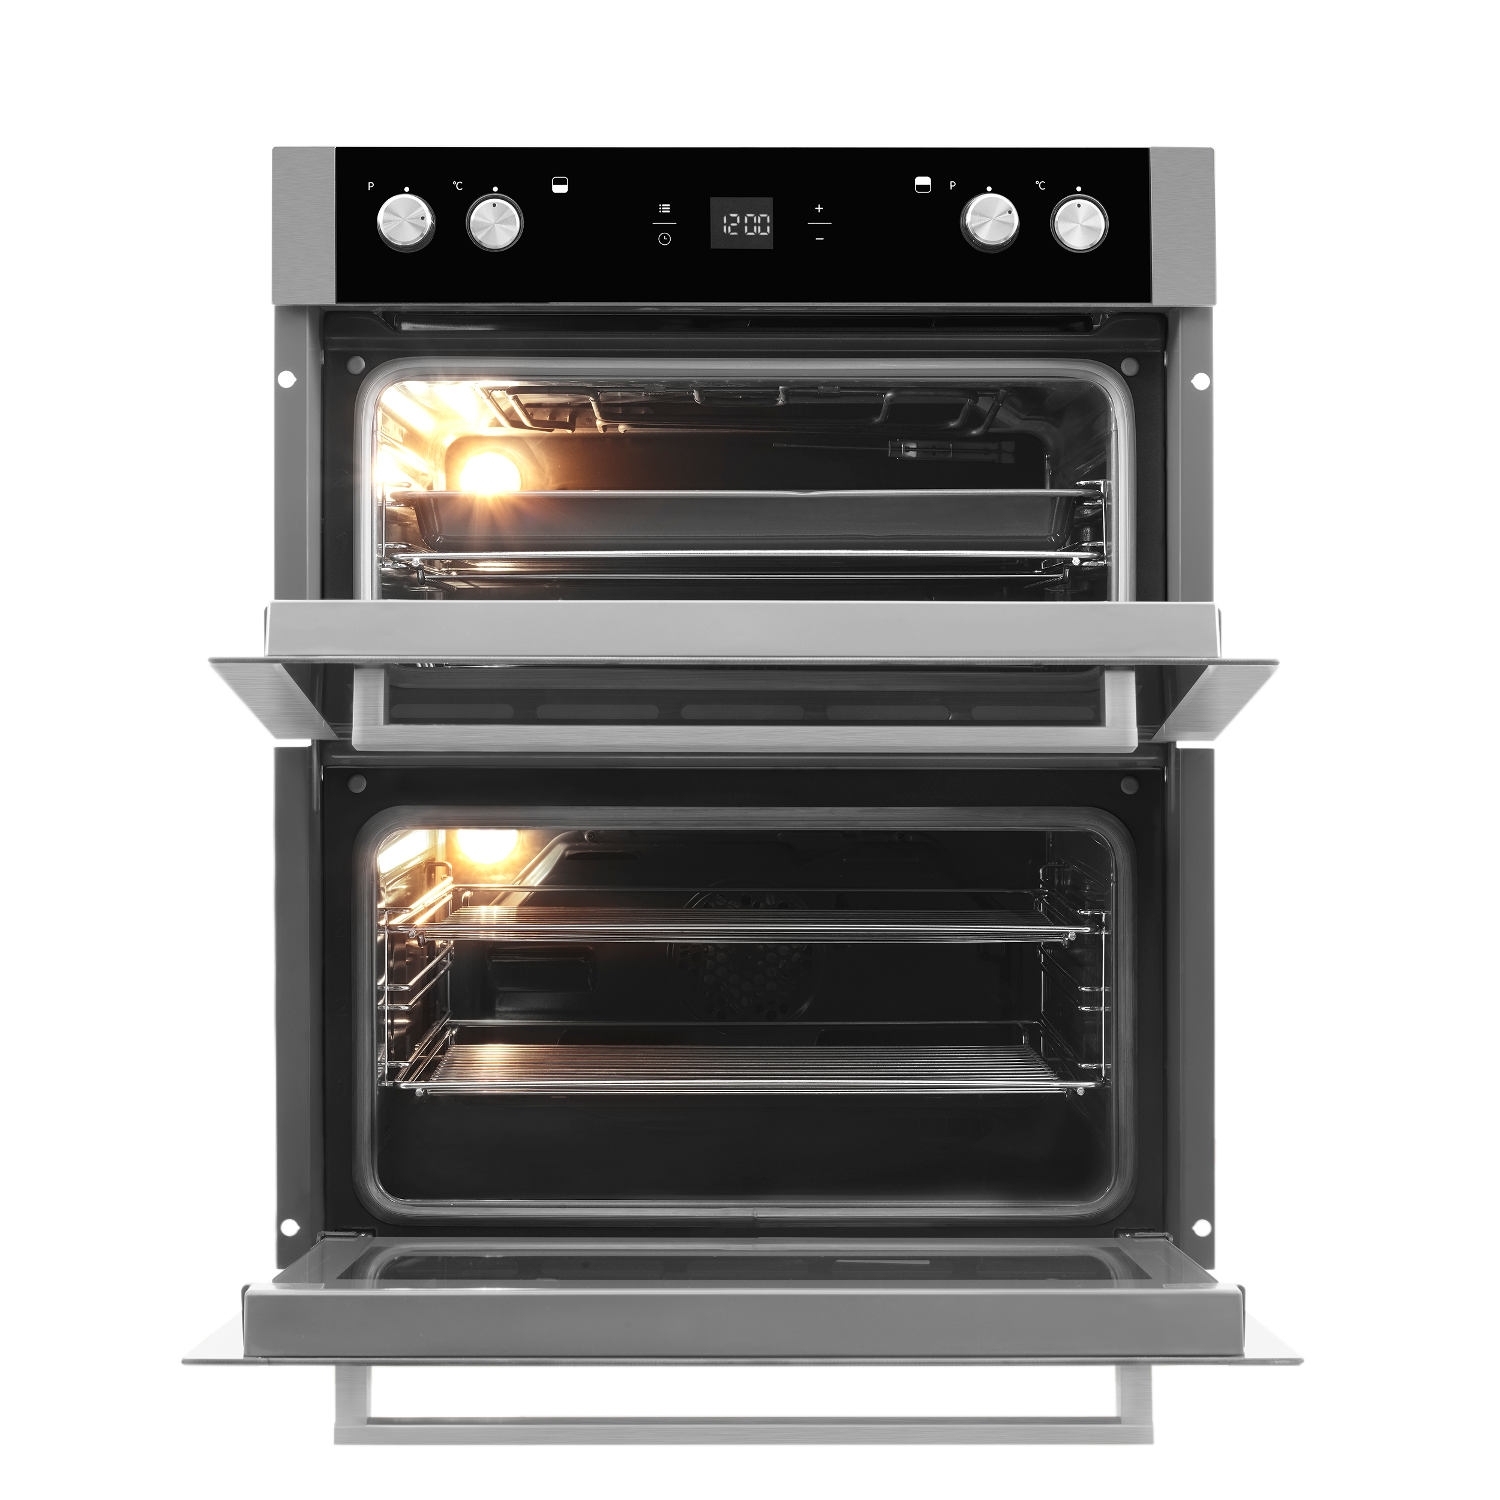 Blomberg OTN9302X Built Under Electric Double Oven - Stainless Steel - 3